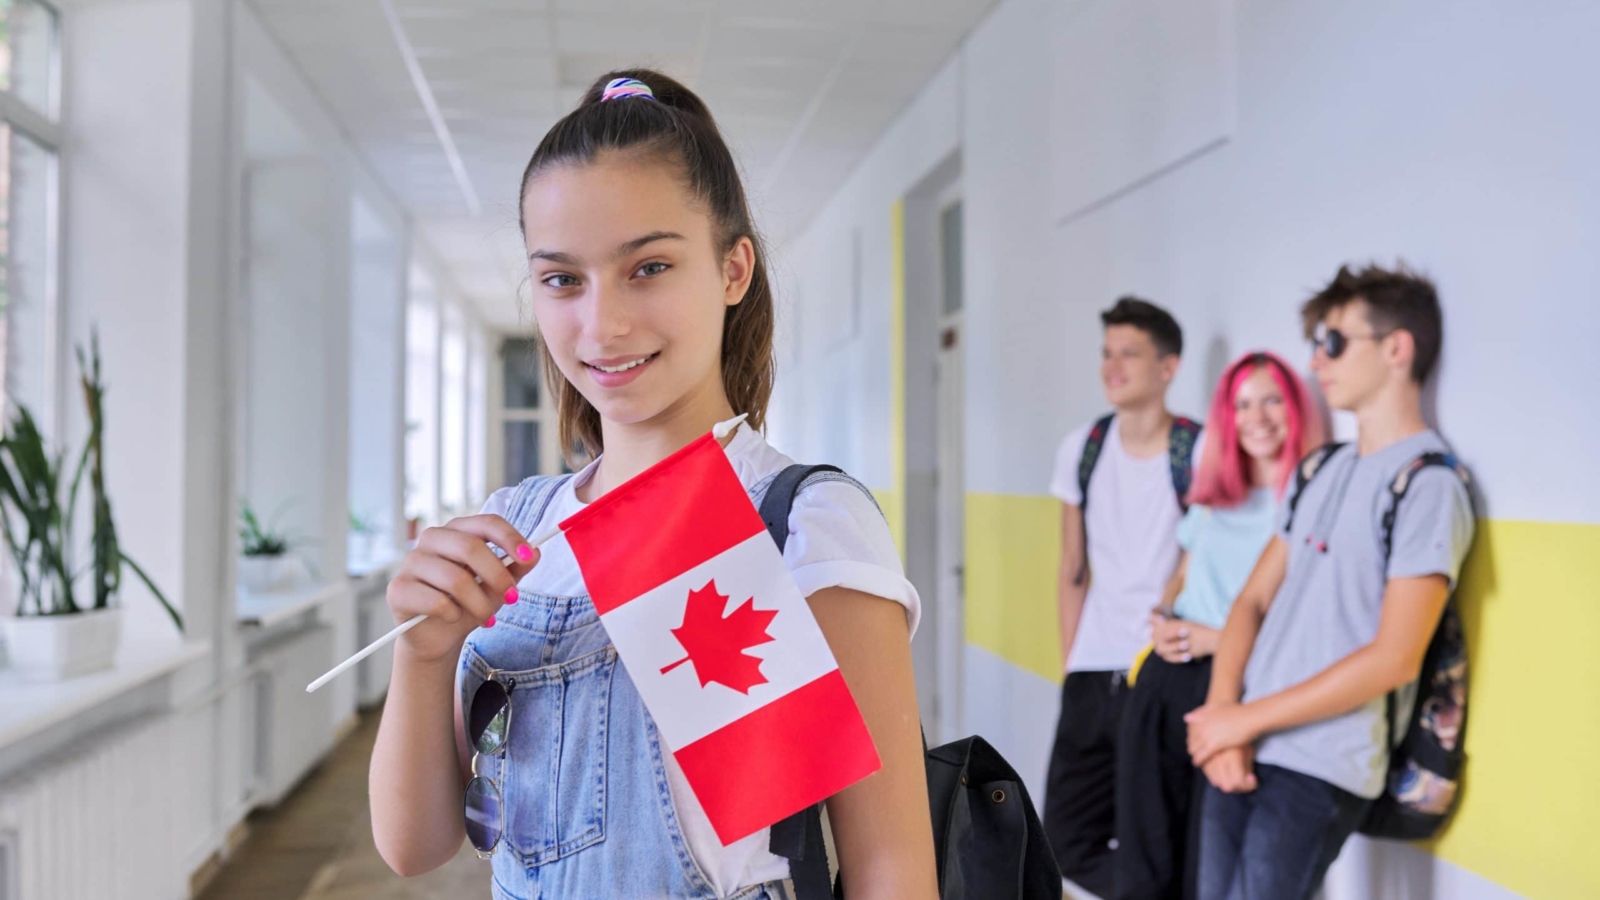 Student teenager female with flag of Canada inside school, children group background. Canada, education and youth, patriotism, people concept